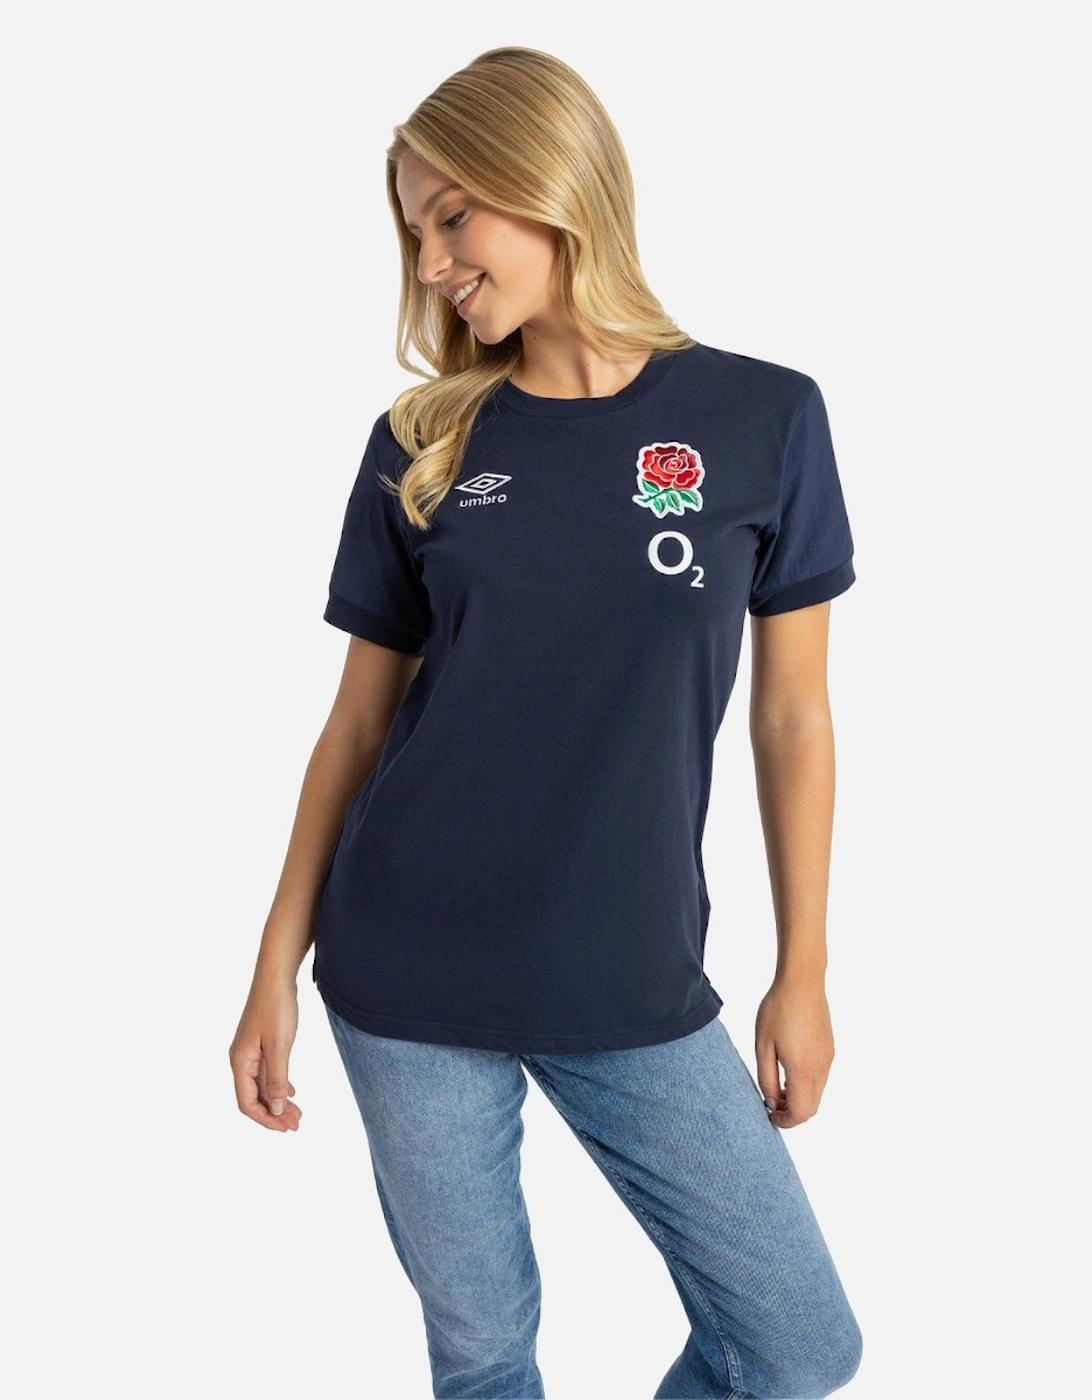 Womens/Ladies 23/24 England Rugby T-Shirt